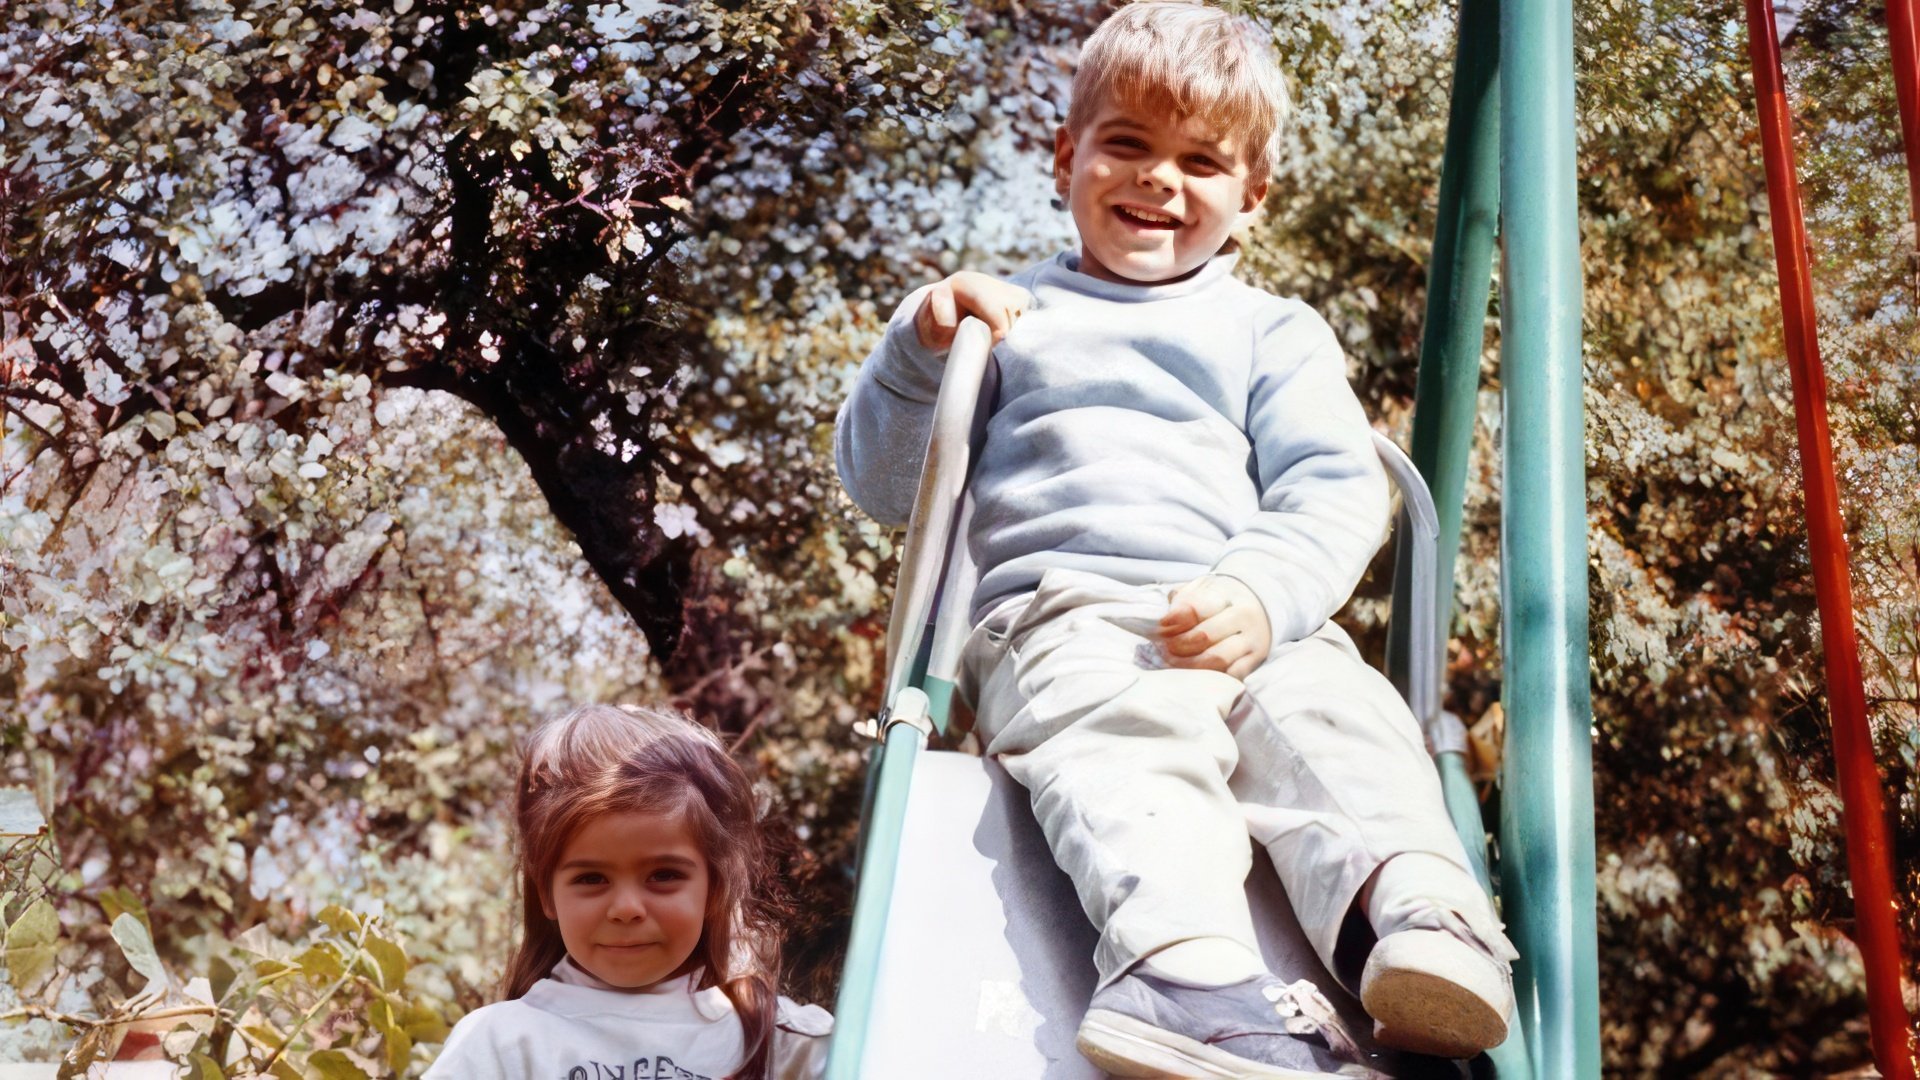 George Clooney in his childhood with his sister